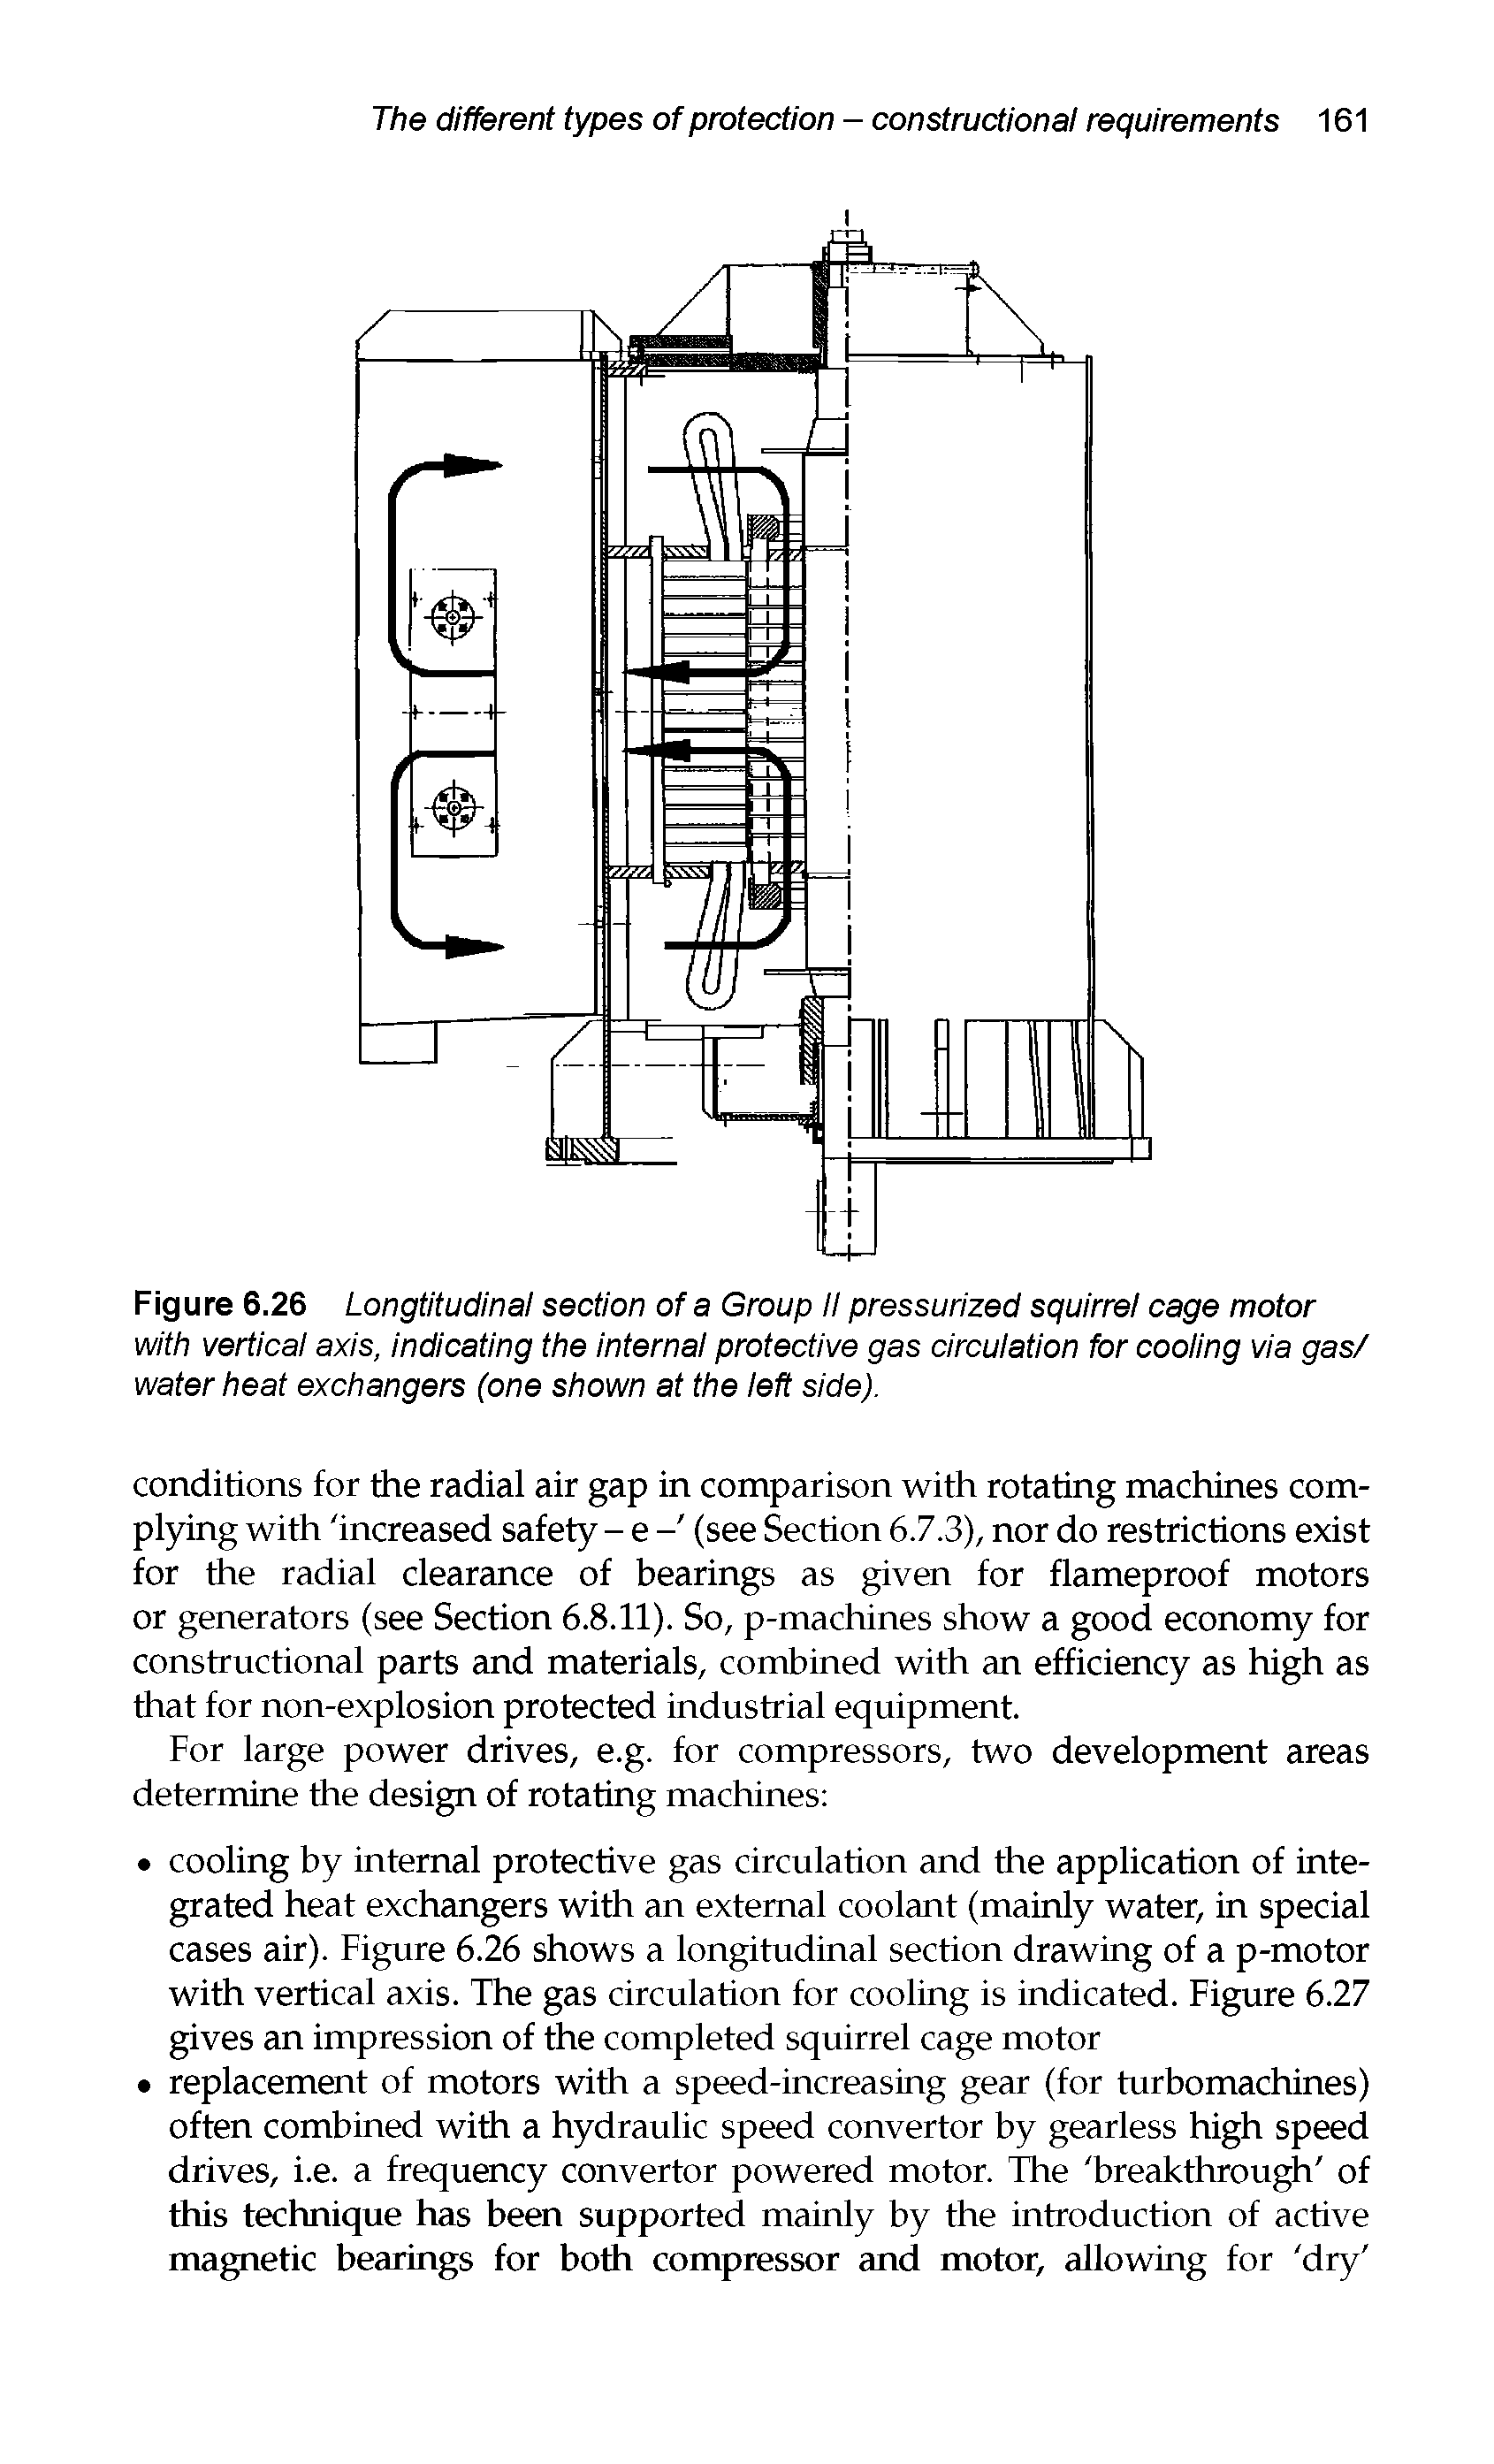 Figure 6.26 Longtitudinal section of a Group II pressurized squirrel cage motor with vertical axis, indicating the internal protective gas circulation for cooling via gas/ water heat exchangers (one shown at the left side).